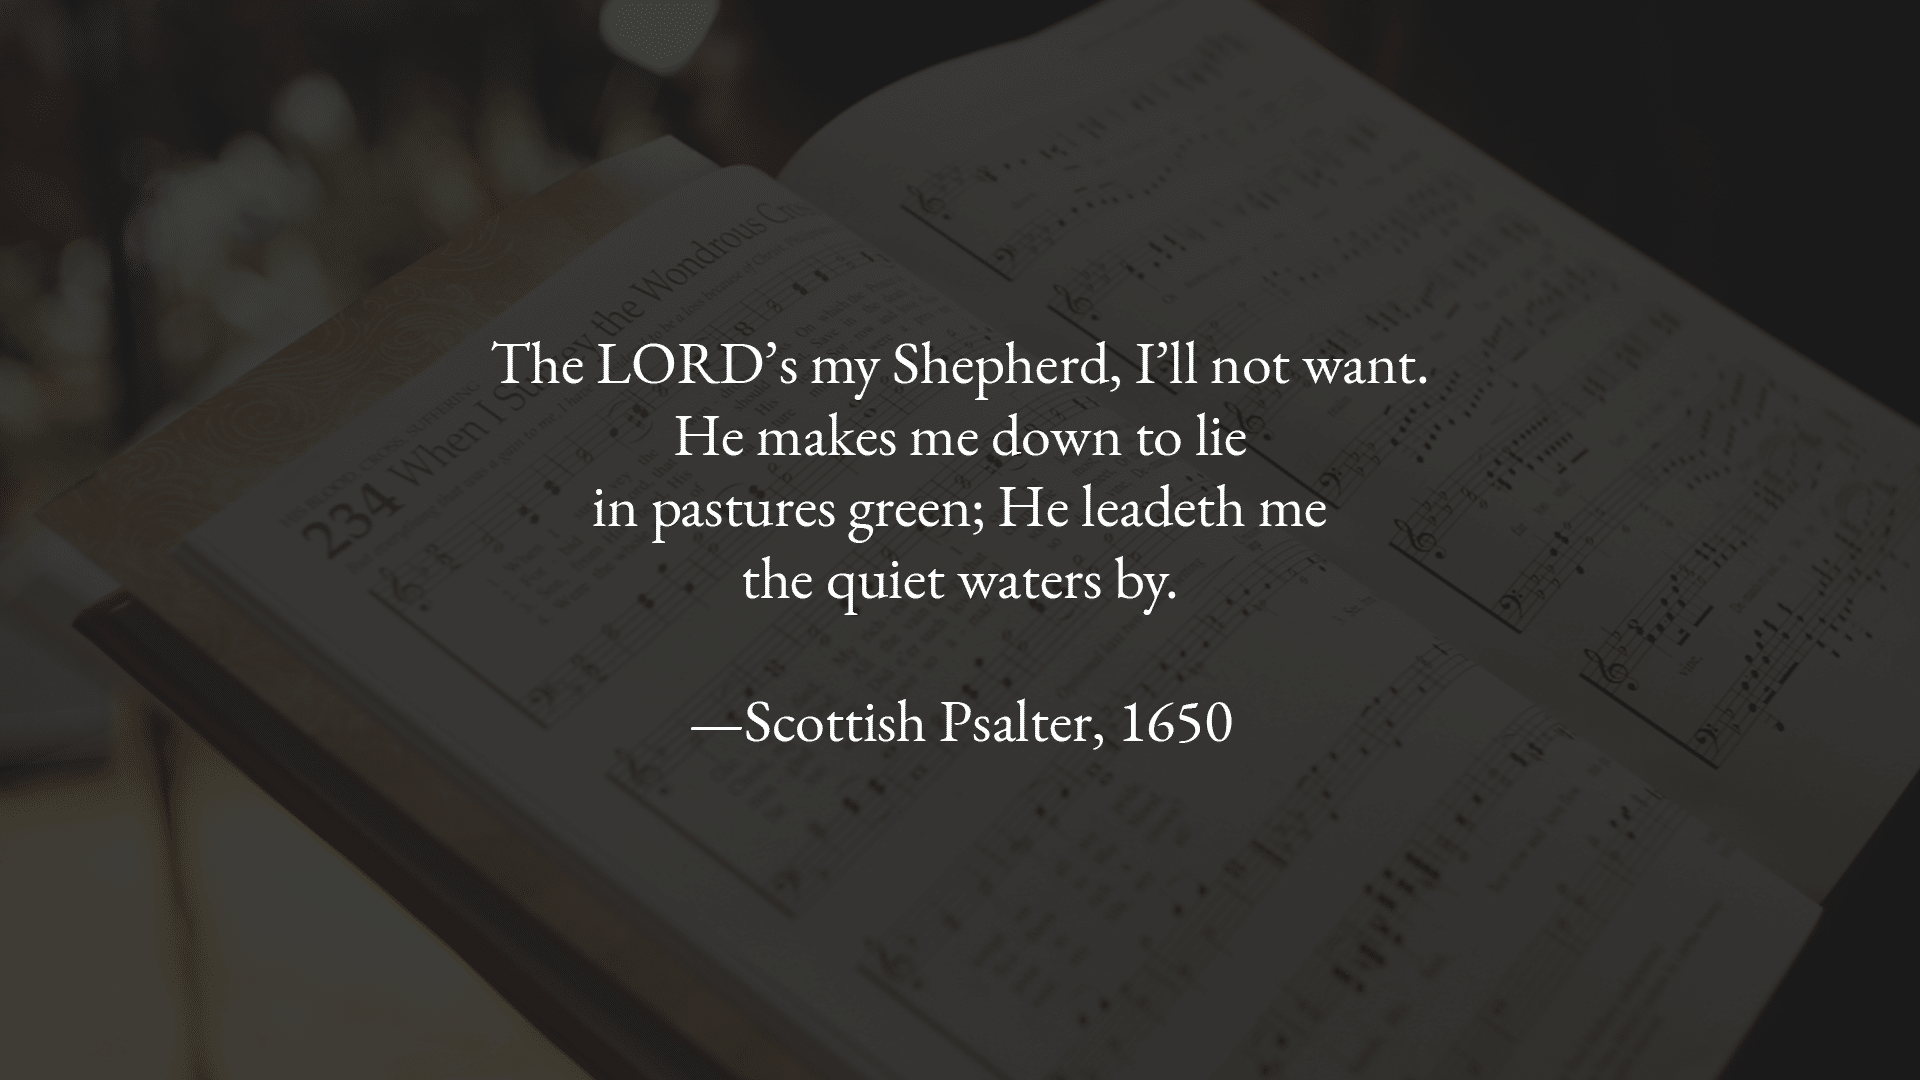 The Lord’s My Shepherd (Ps 23)